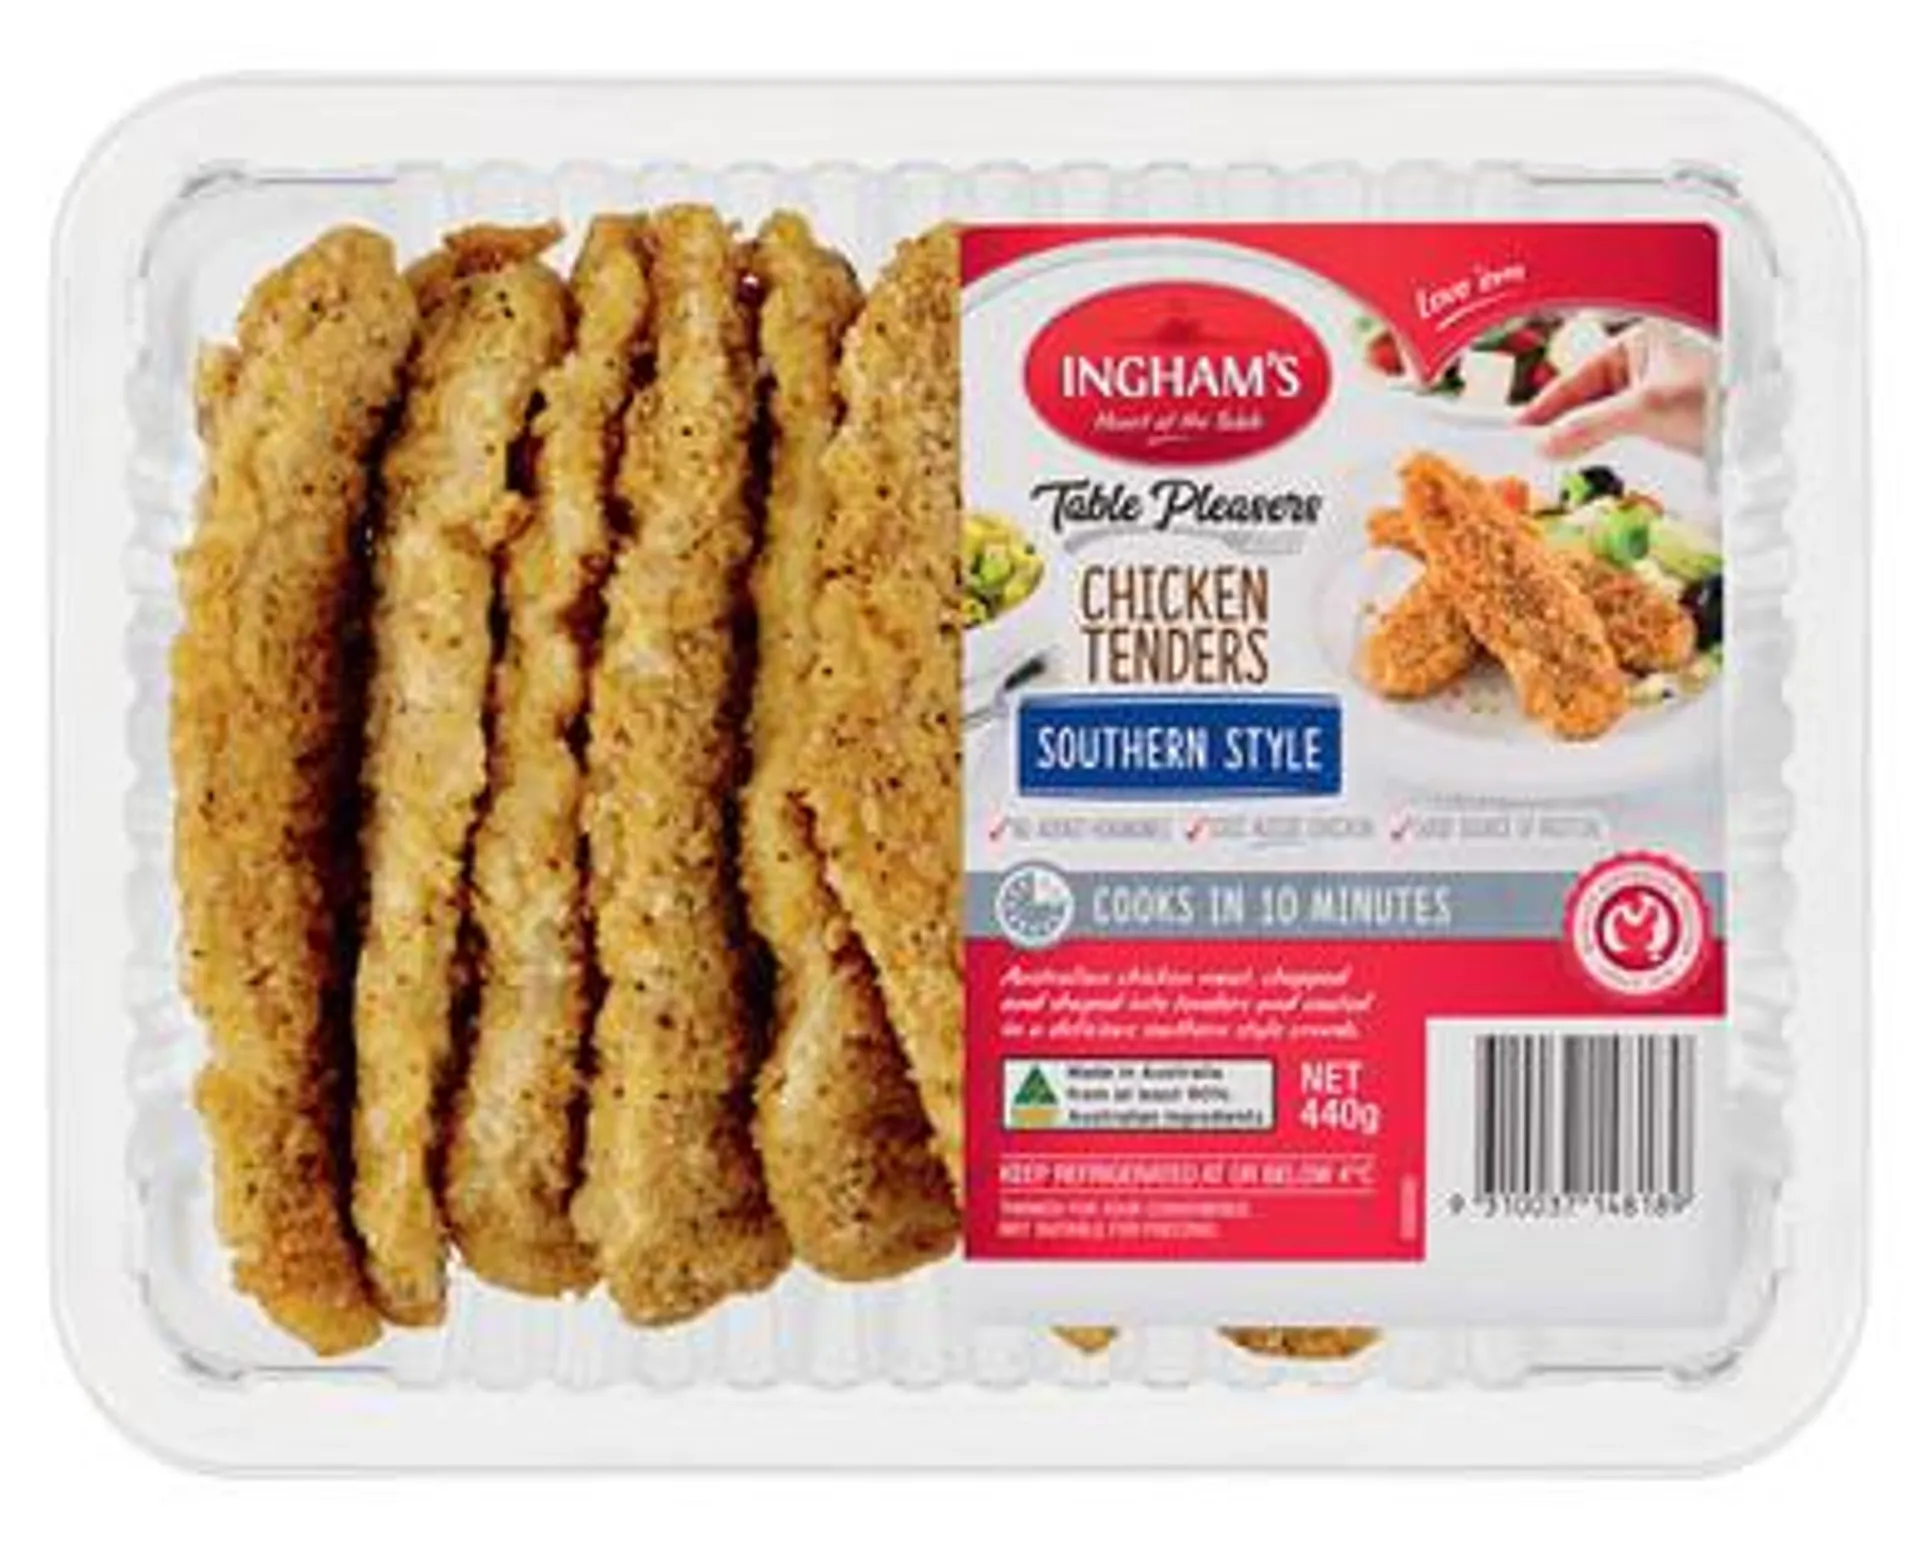 Ingham’s Southern Style Chicken Tenders 440g